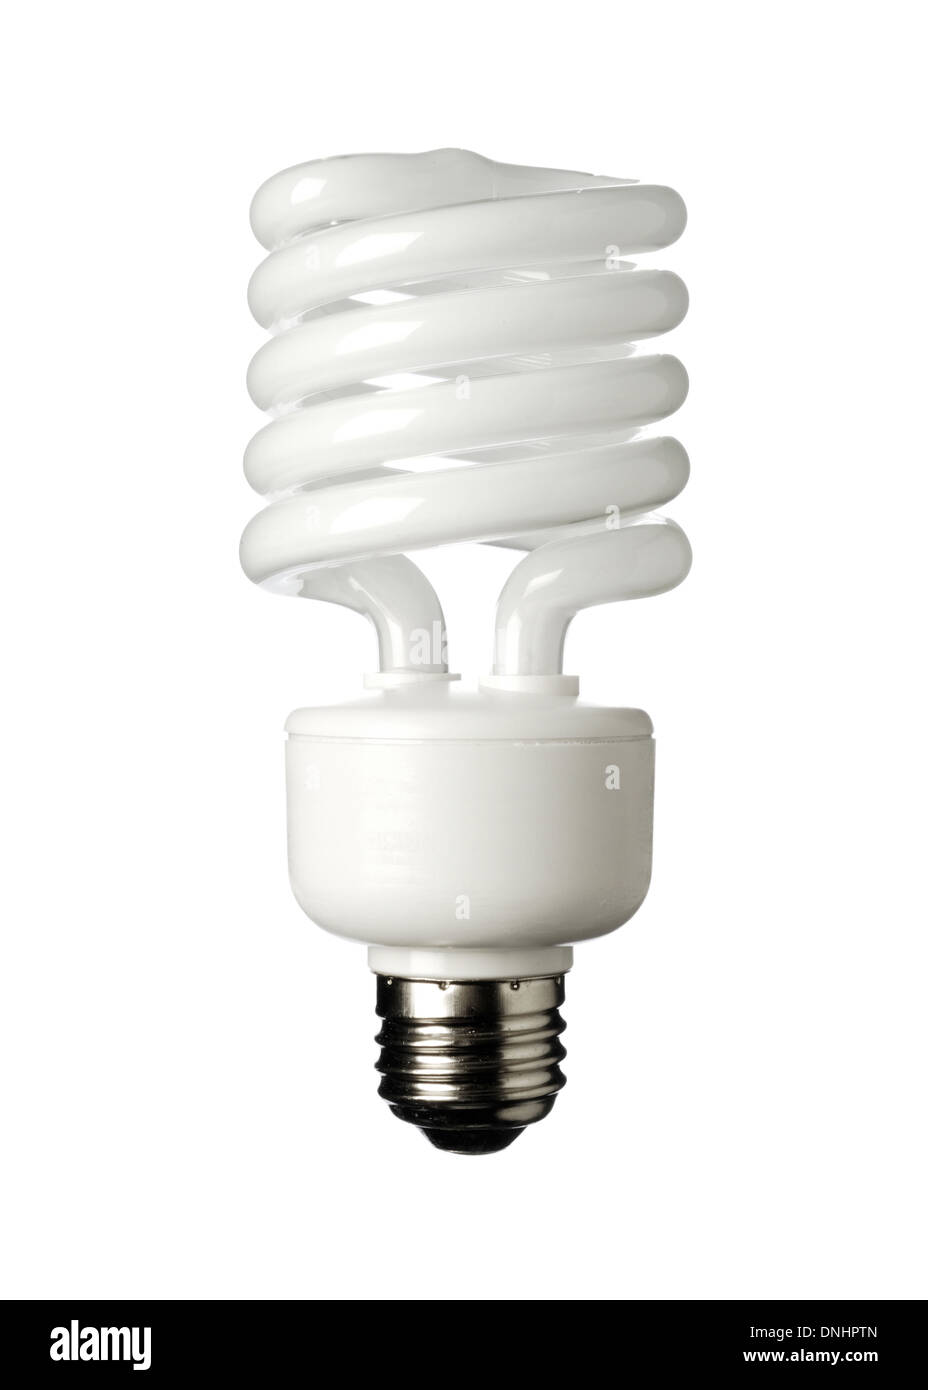 An energy savings light bulb on a white background. Compact Fluorescent light bulb CFL Stock Photo